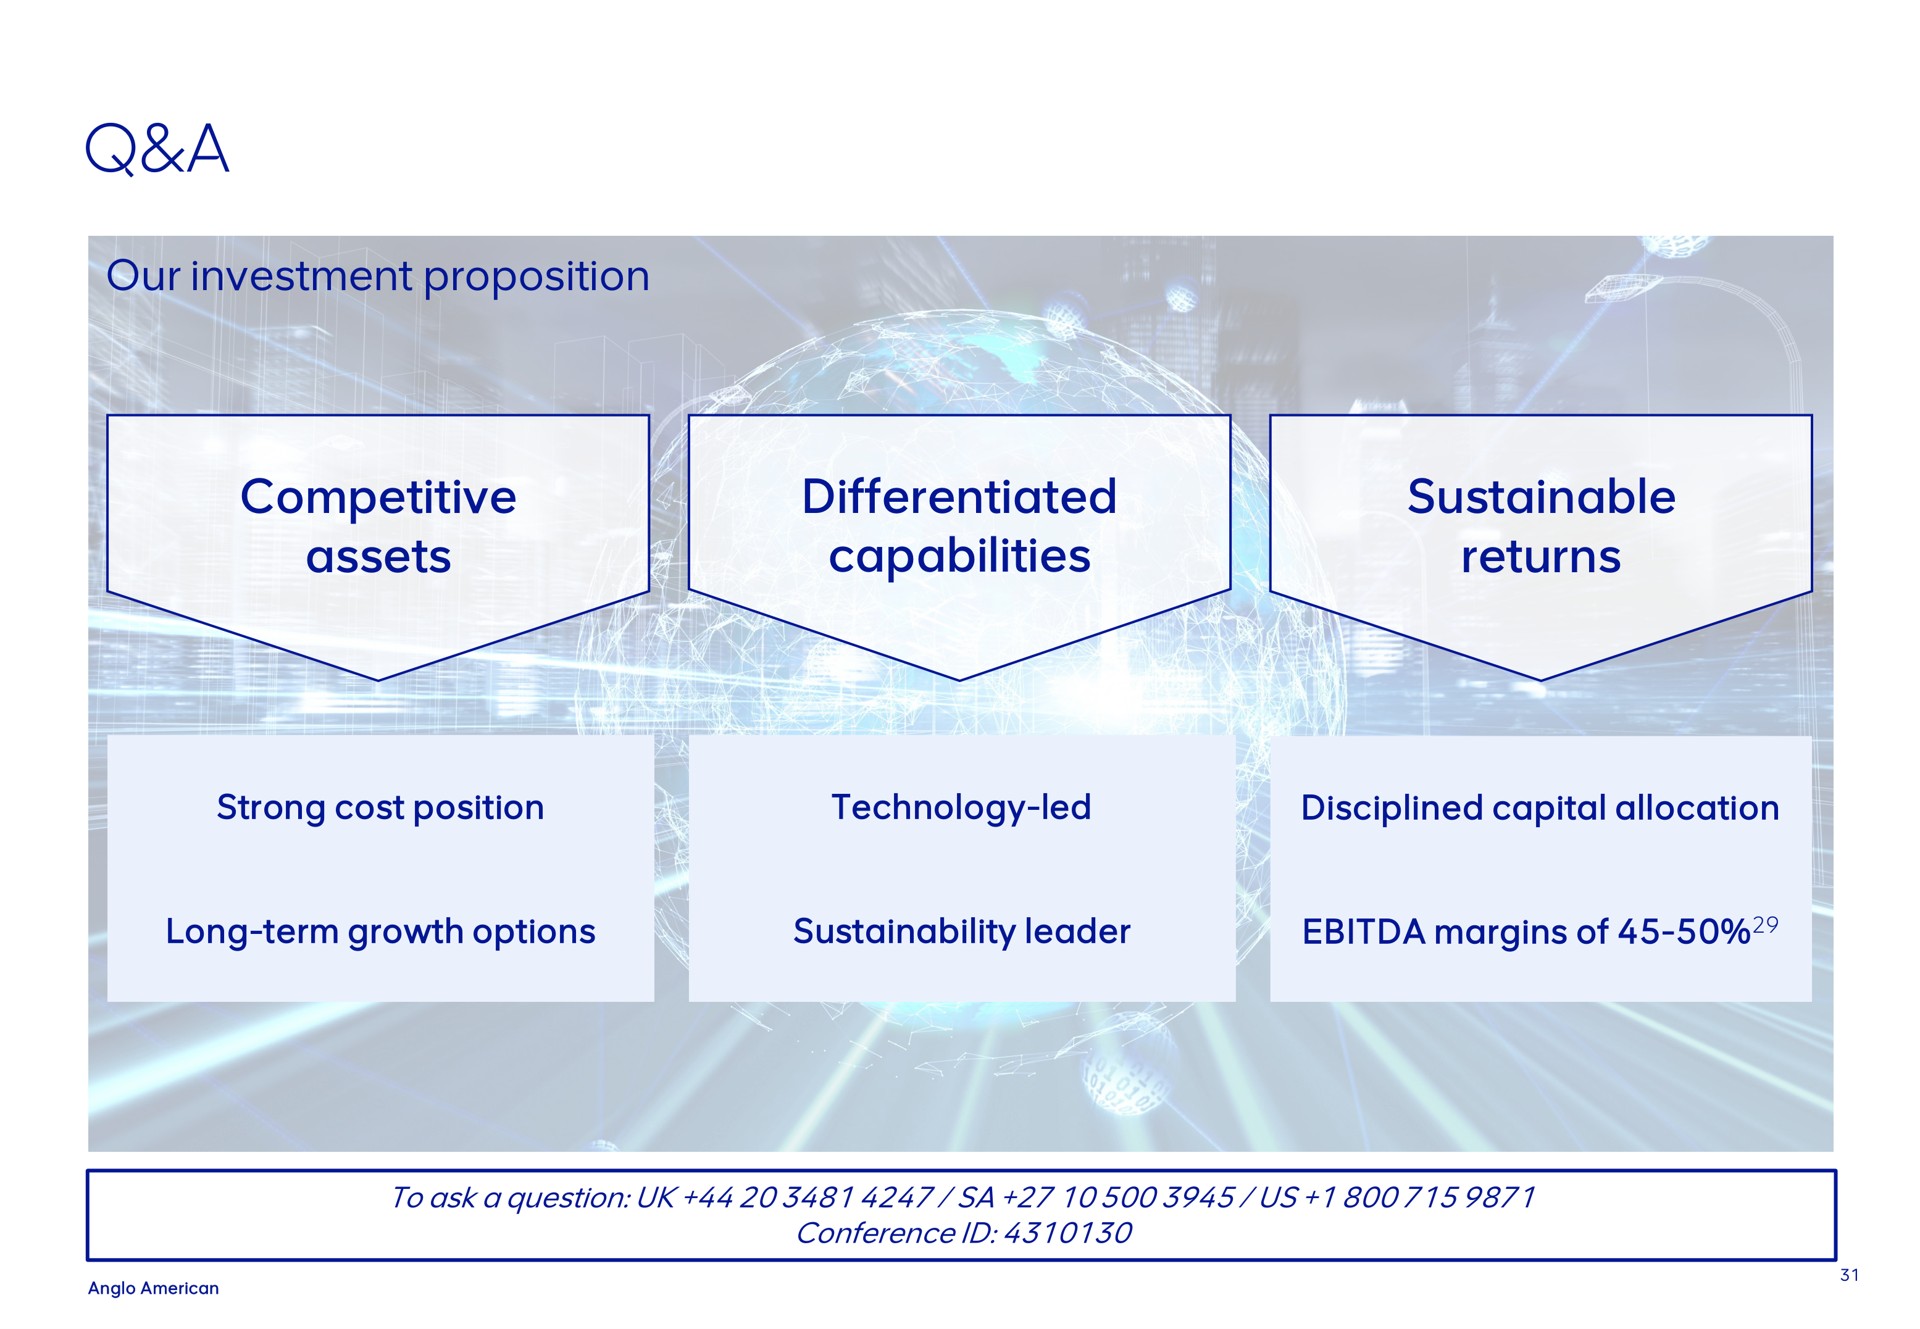 a our investment proposition returns differentiated capabilities competitive sustainable assets strong cost position technology led disciplined capital allocation long term growth options leader margins of to ask question us conference | AngloAmerican